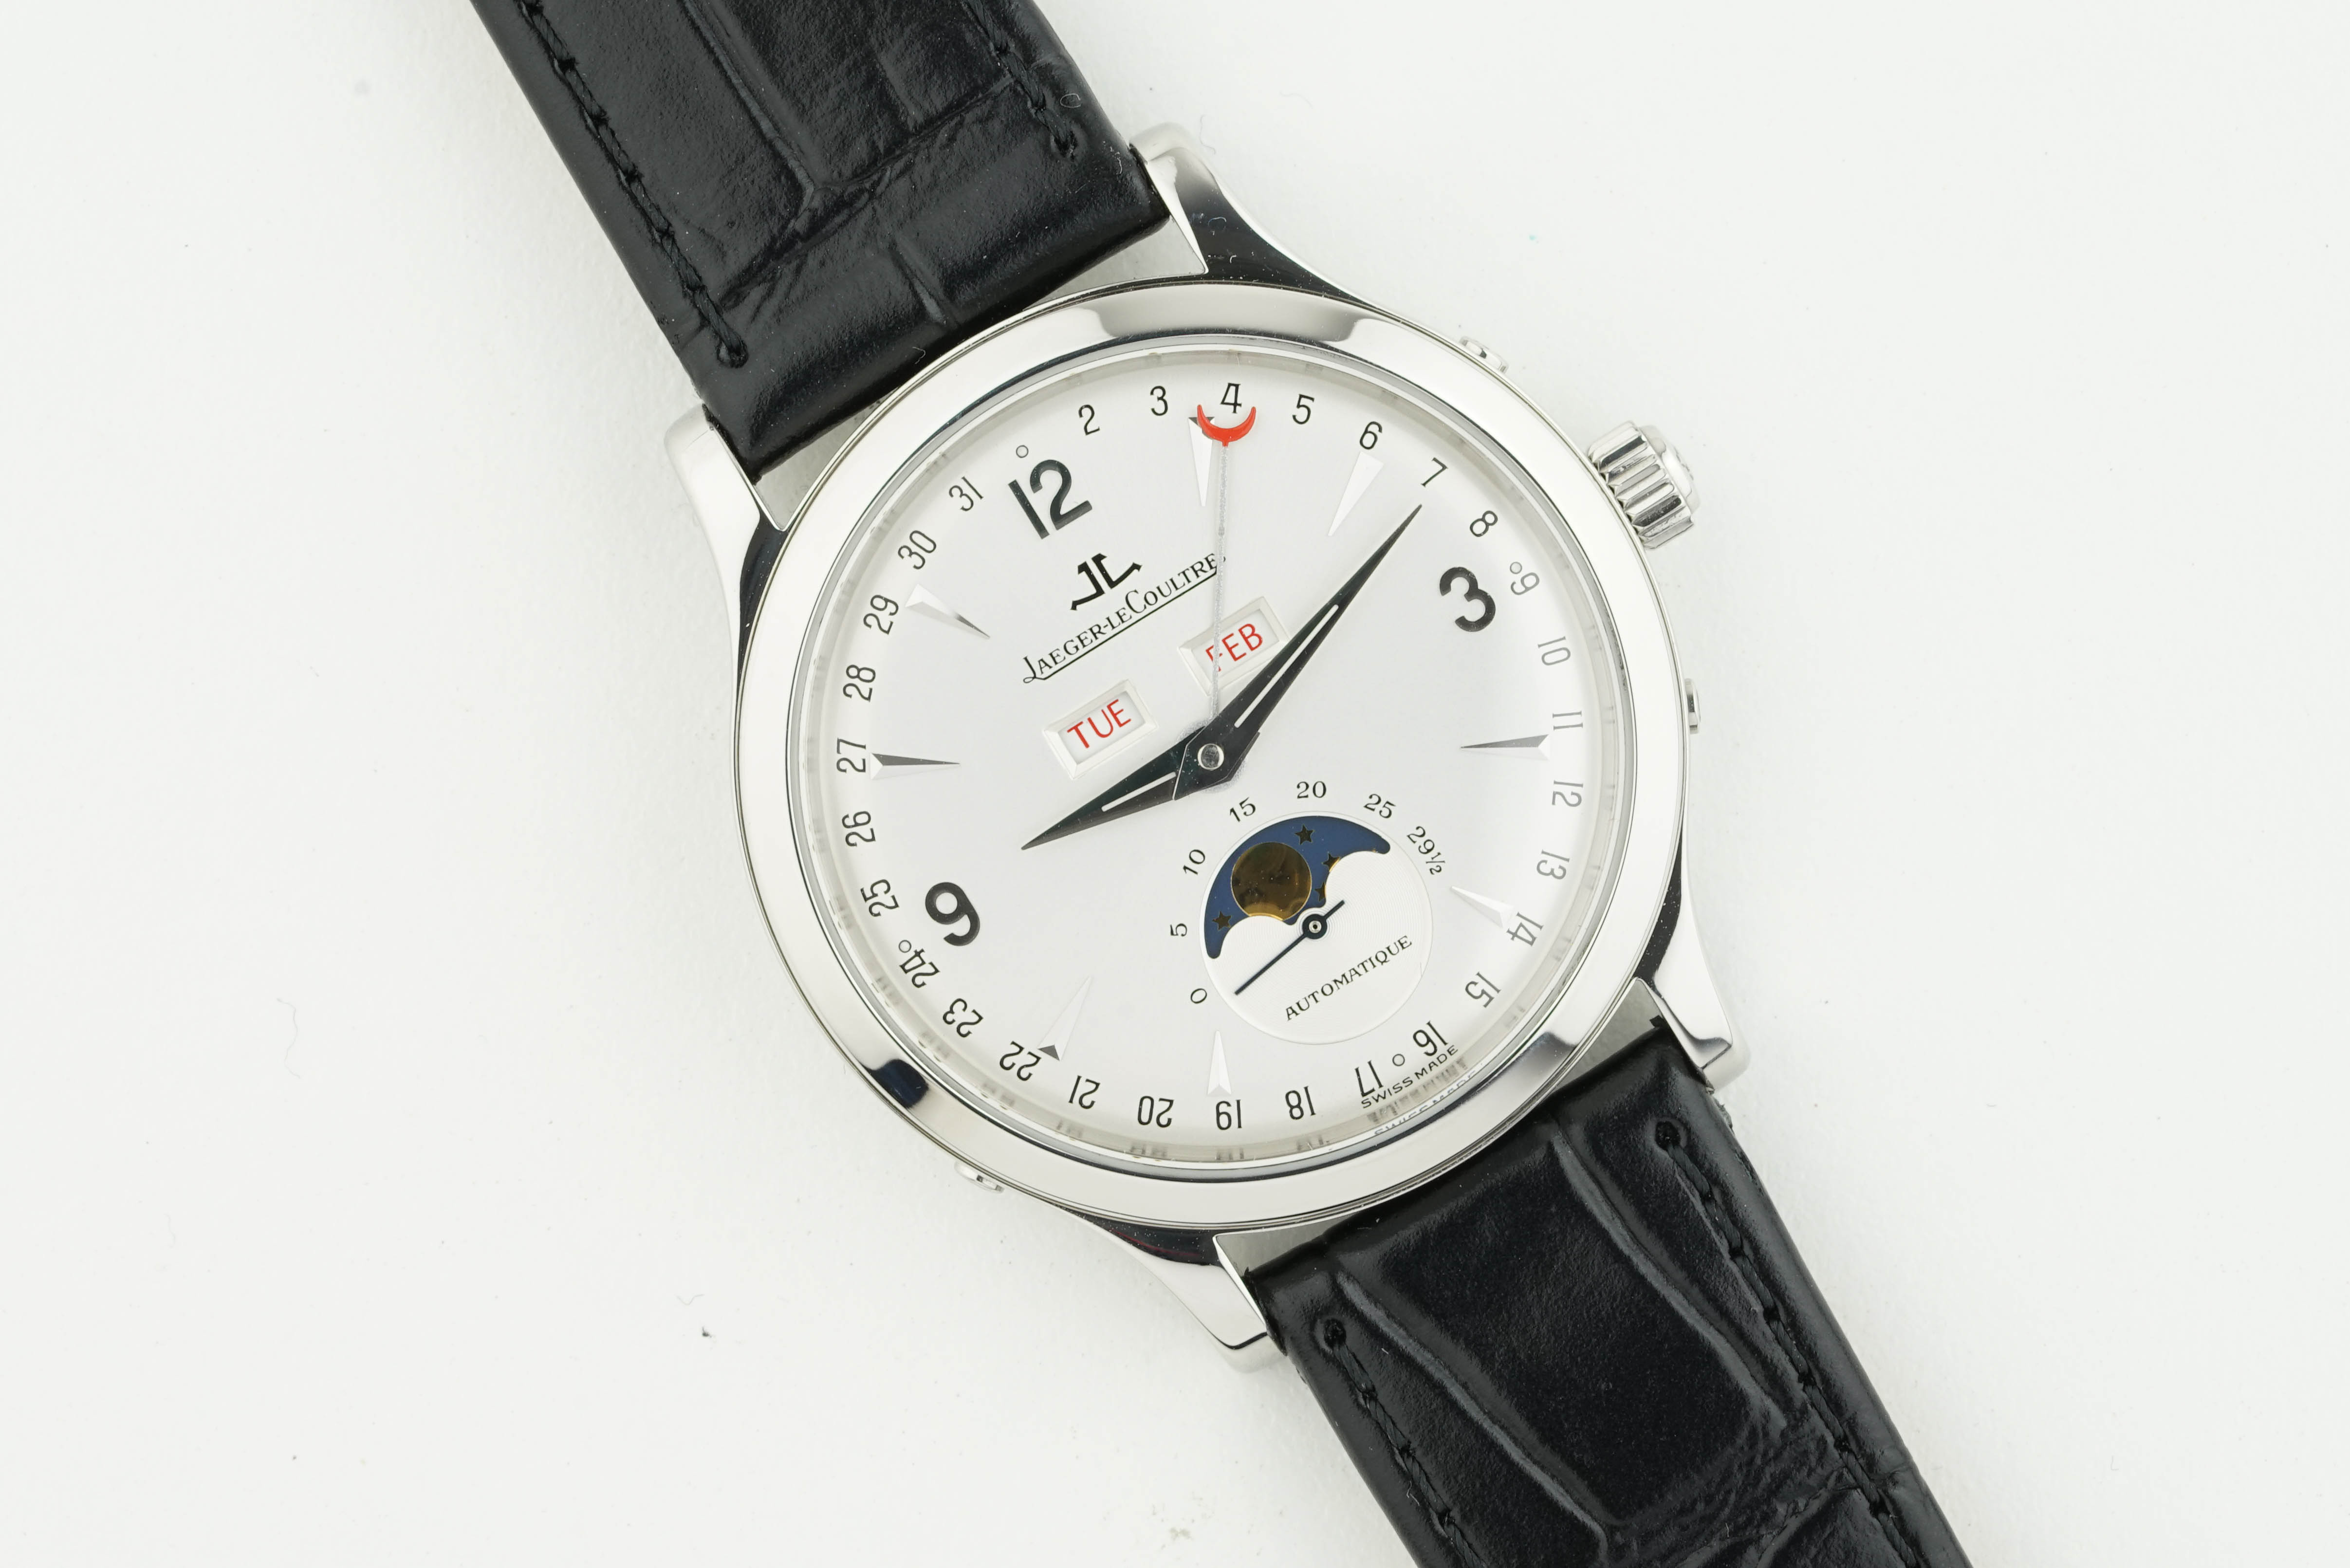 JAEGER LE COULTRE MASTER CALENDAR MOONPHASE REF. 140898, circular silver dial with hour markers